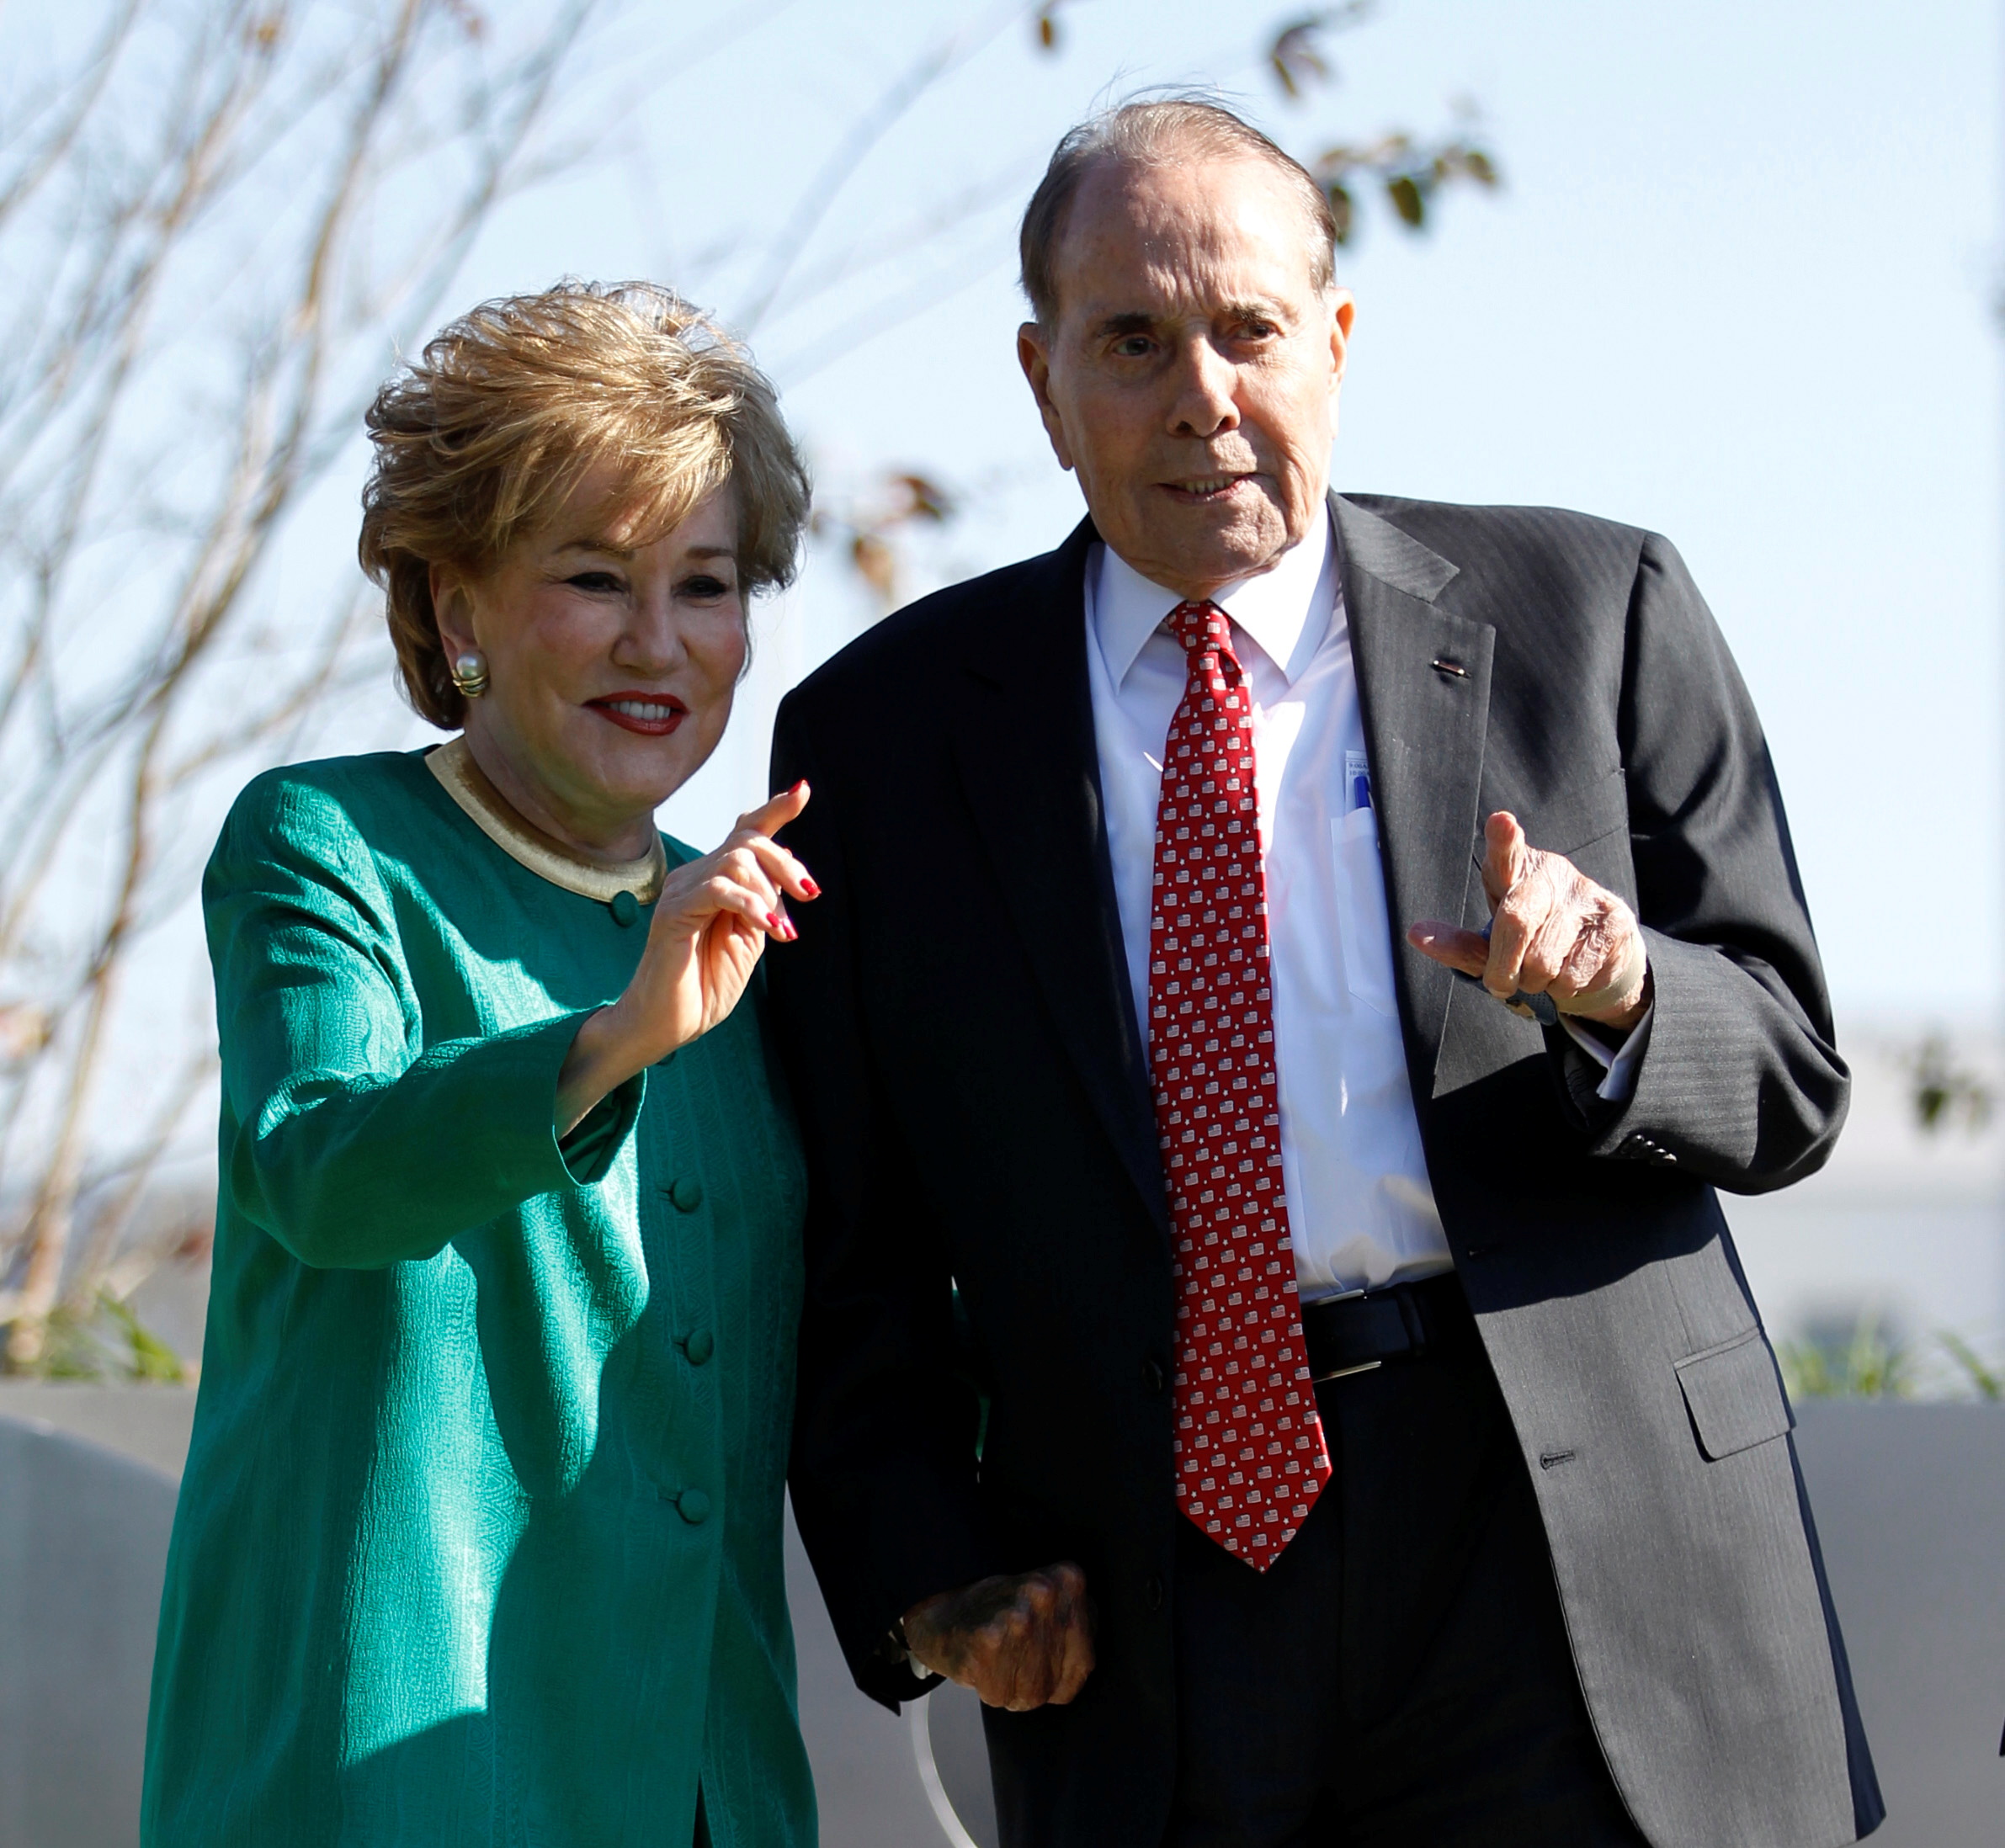 Former U.S. Secretary of Transportation Elizabeth Dole and her husband, former Senator Bob Dole, are pictured at the unveiling of a statue of former U.S. President Ronald Reagan at Ronald Reagan National Airport near Washington